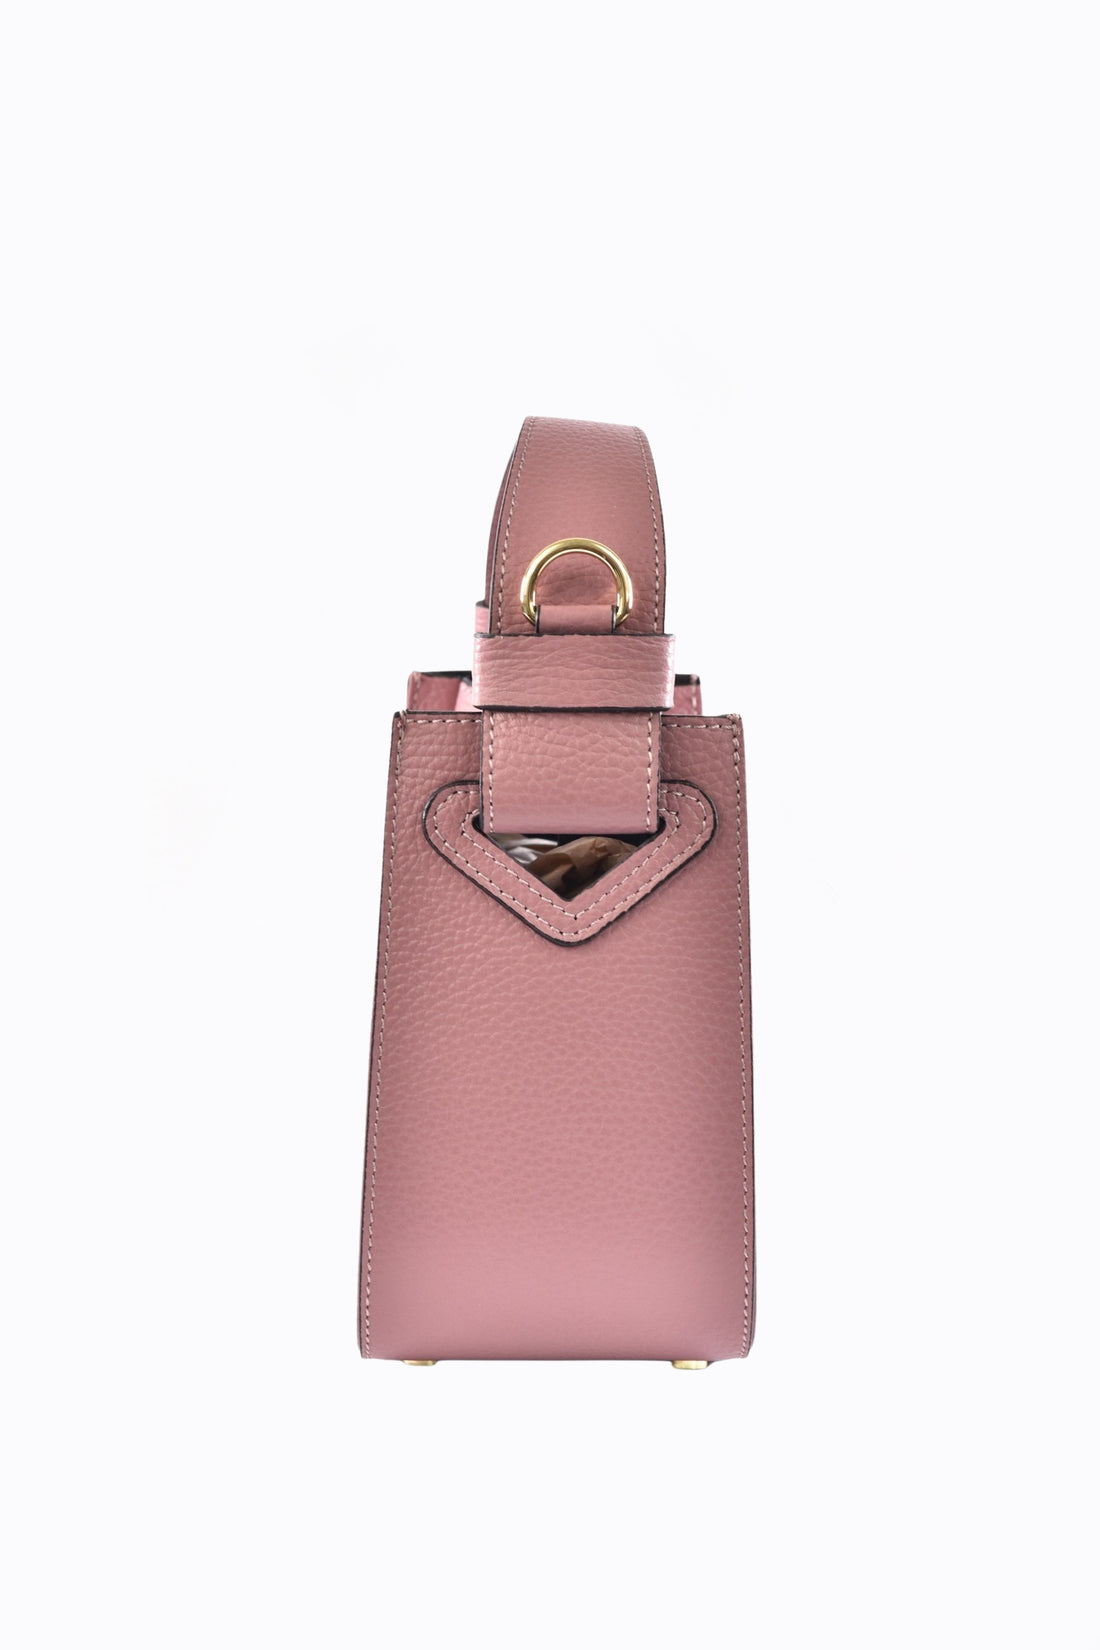 Kendall bag in antique pink dollar leather